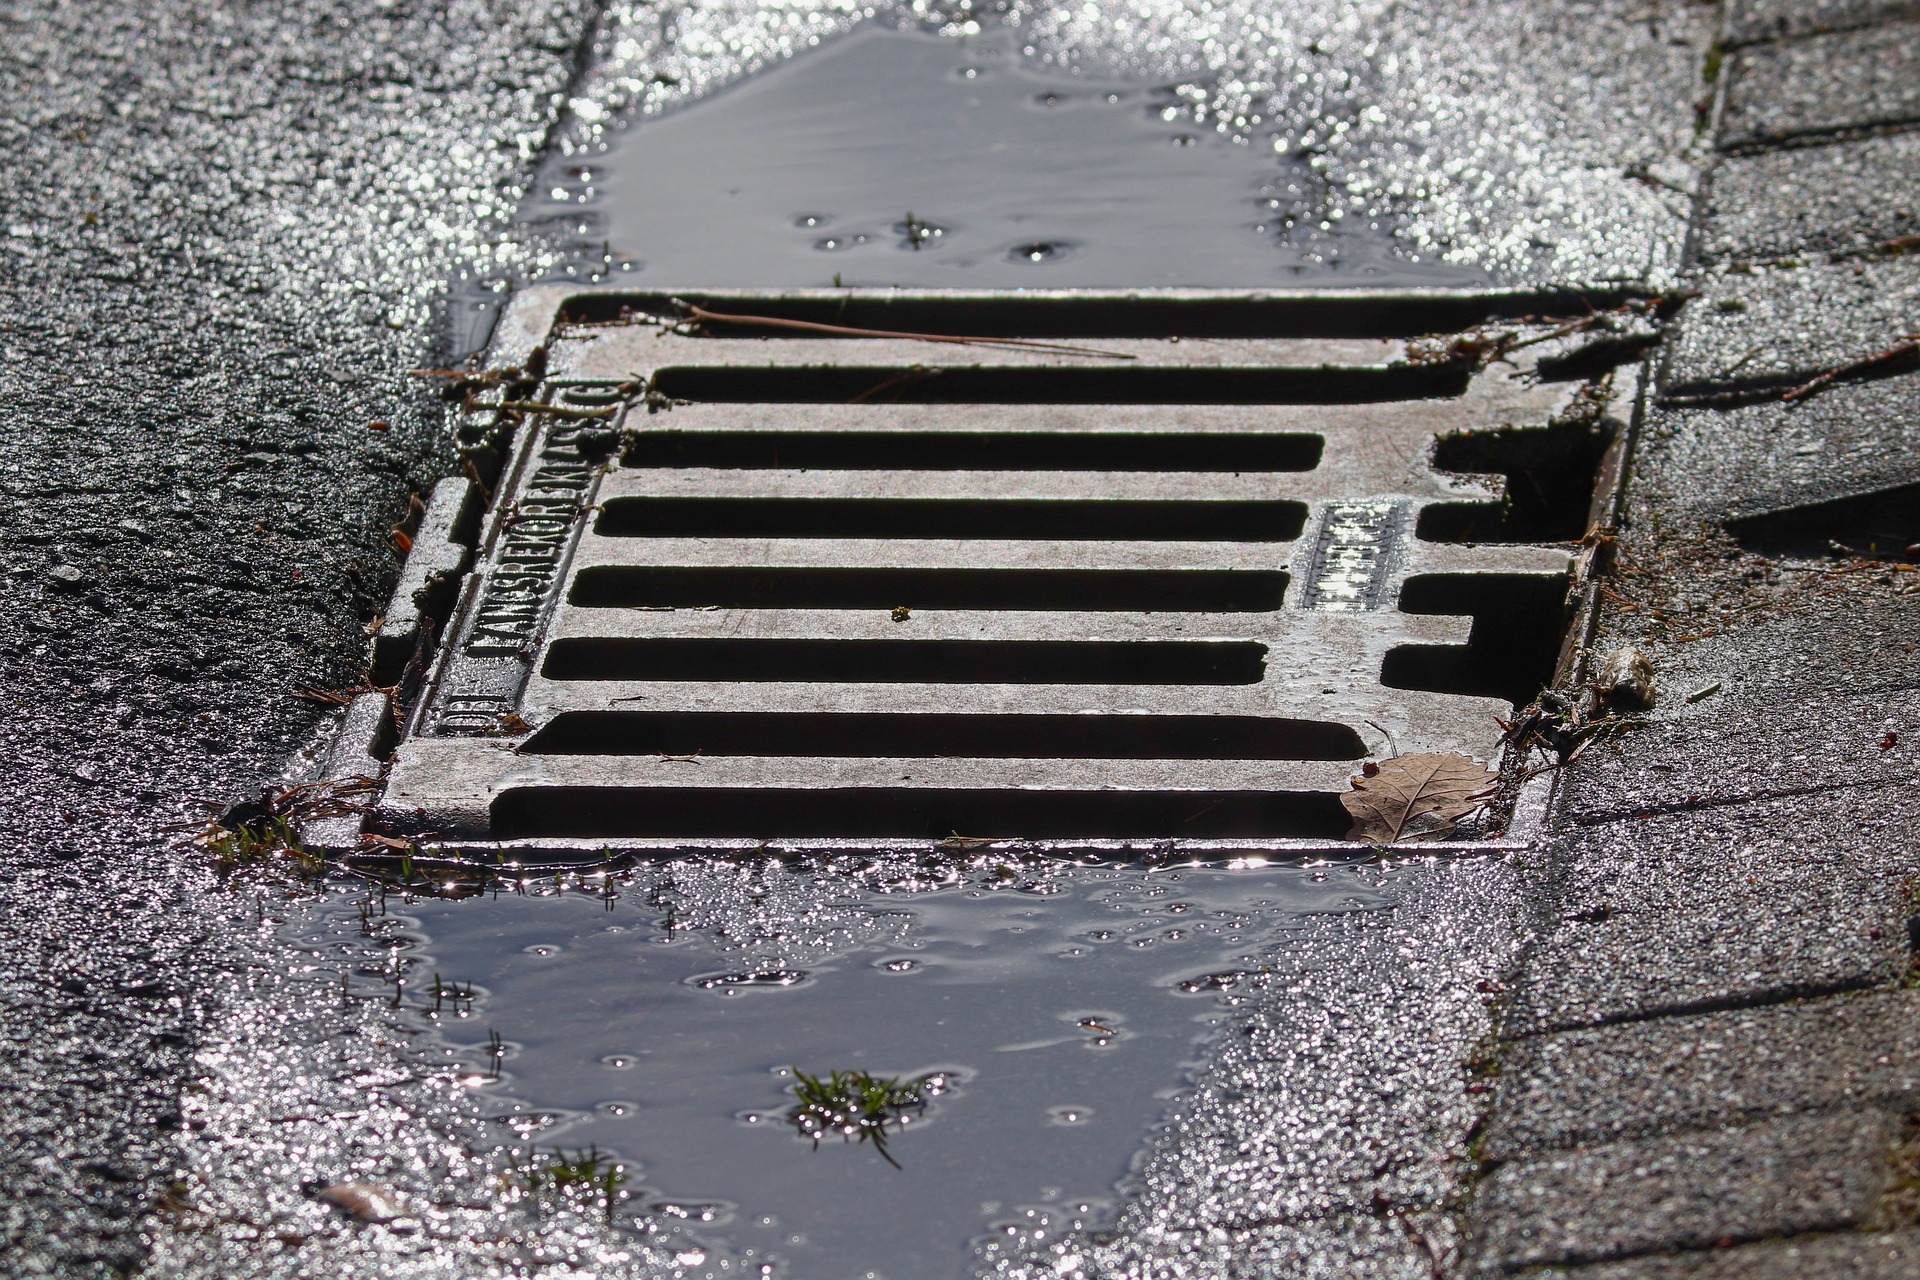 A Homeowner’s Guide To Stormwater System Maintenance